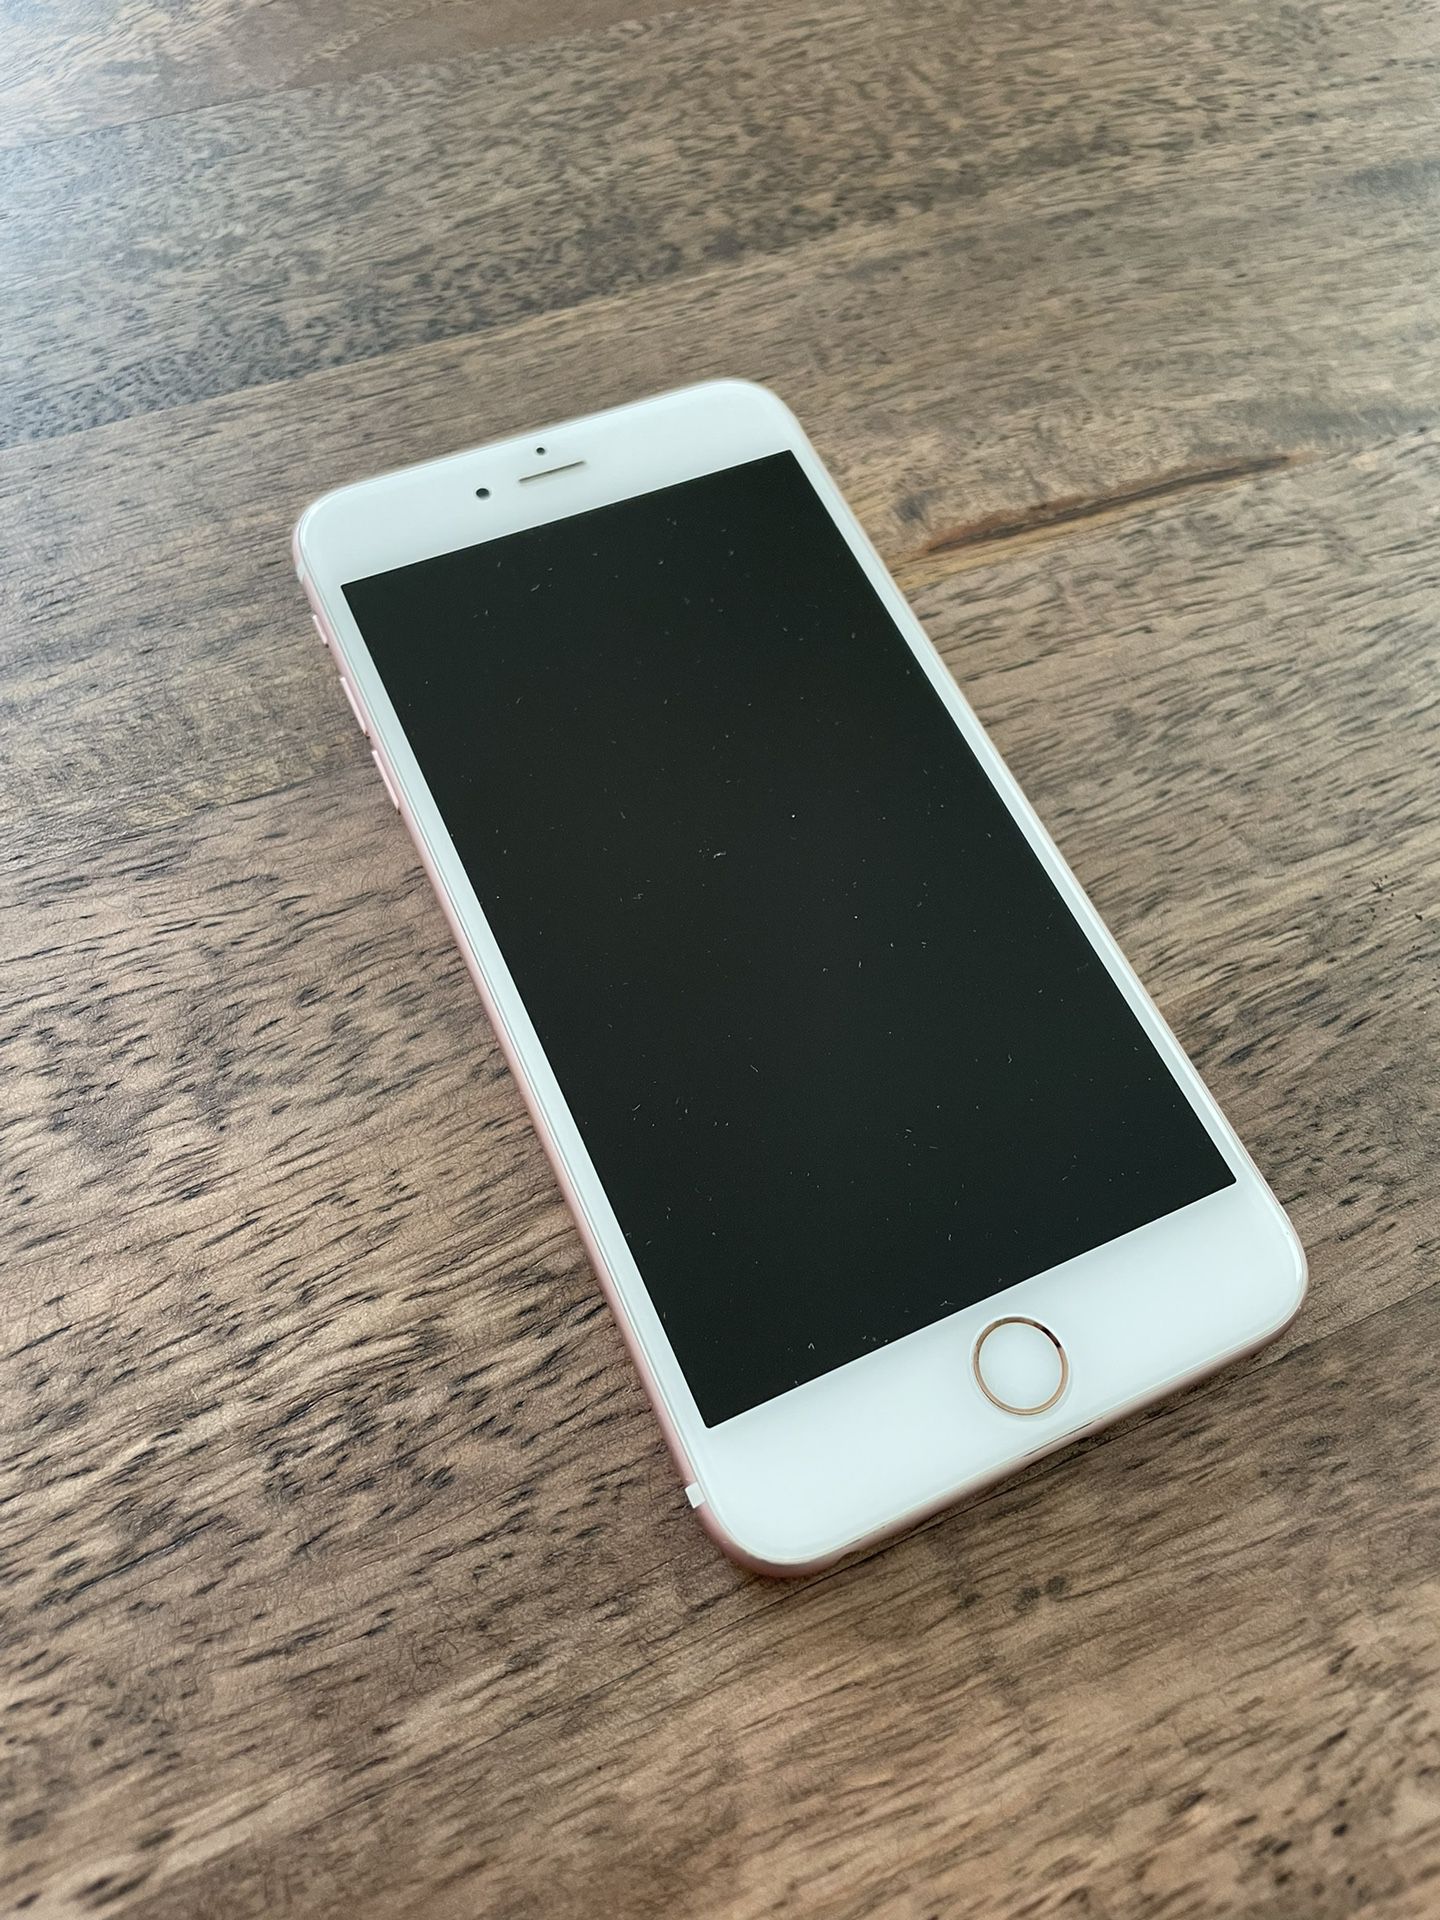 iPhone 6S Plus 64 GB - Factory Reset - Very Good Condition